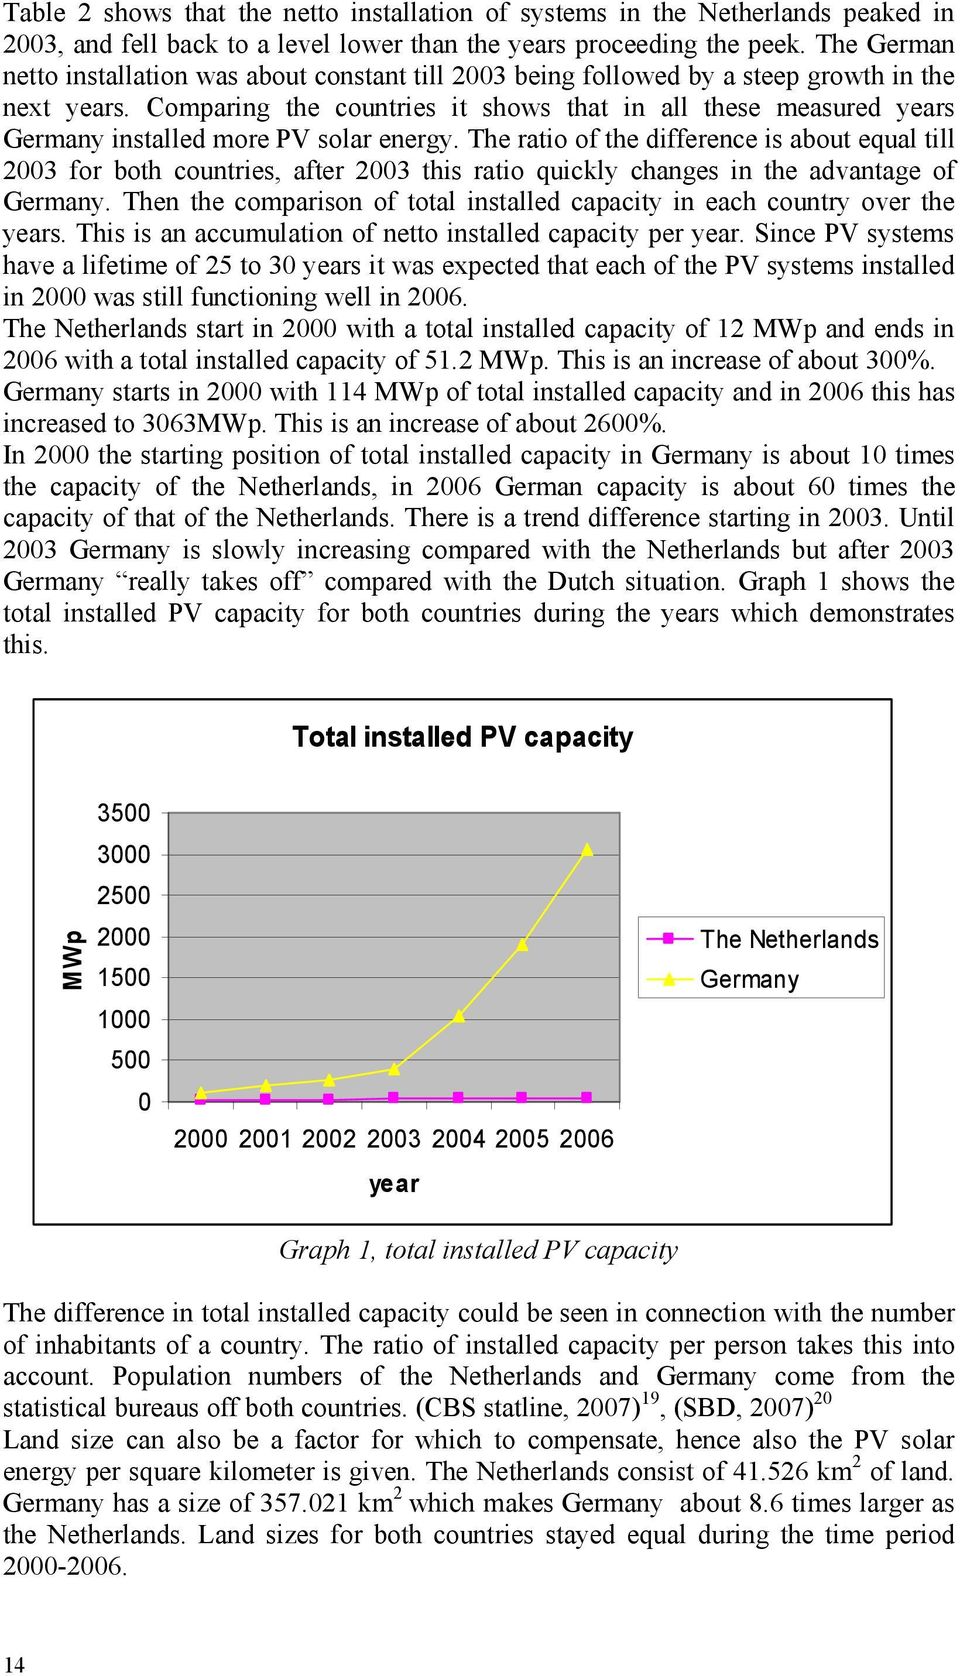 Comparing the countries it shows that in all these measured years Germany installed more PV solar energy.